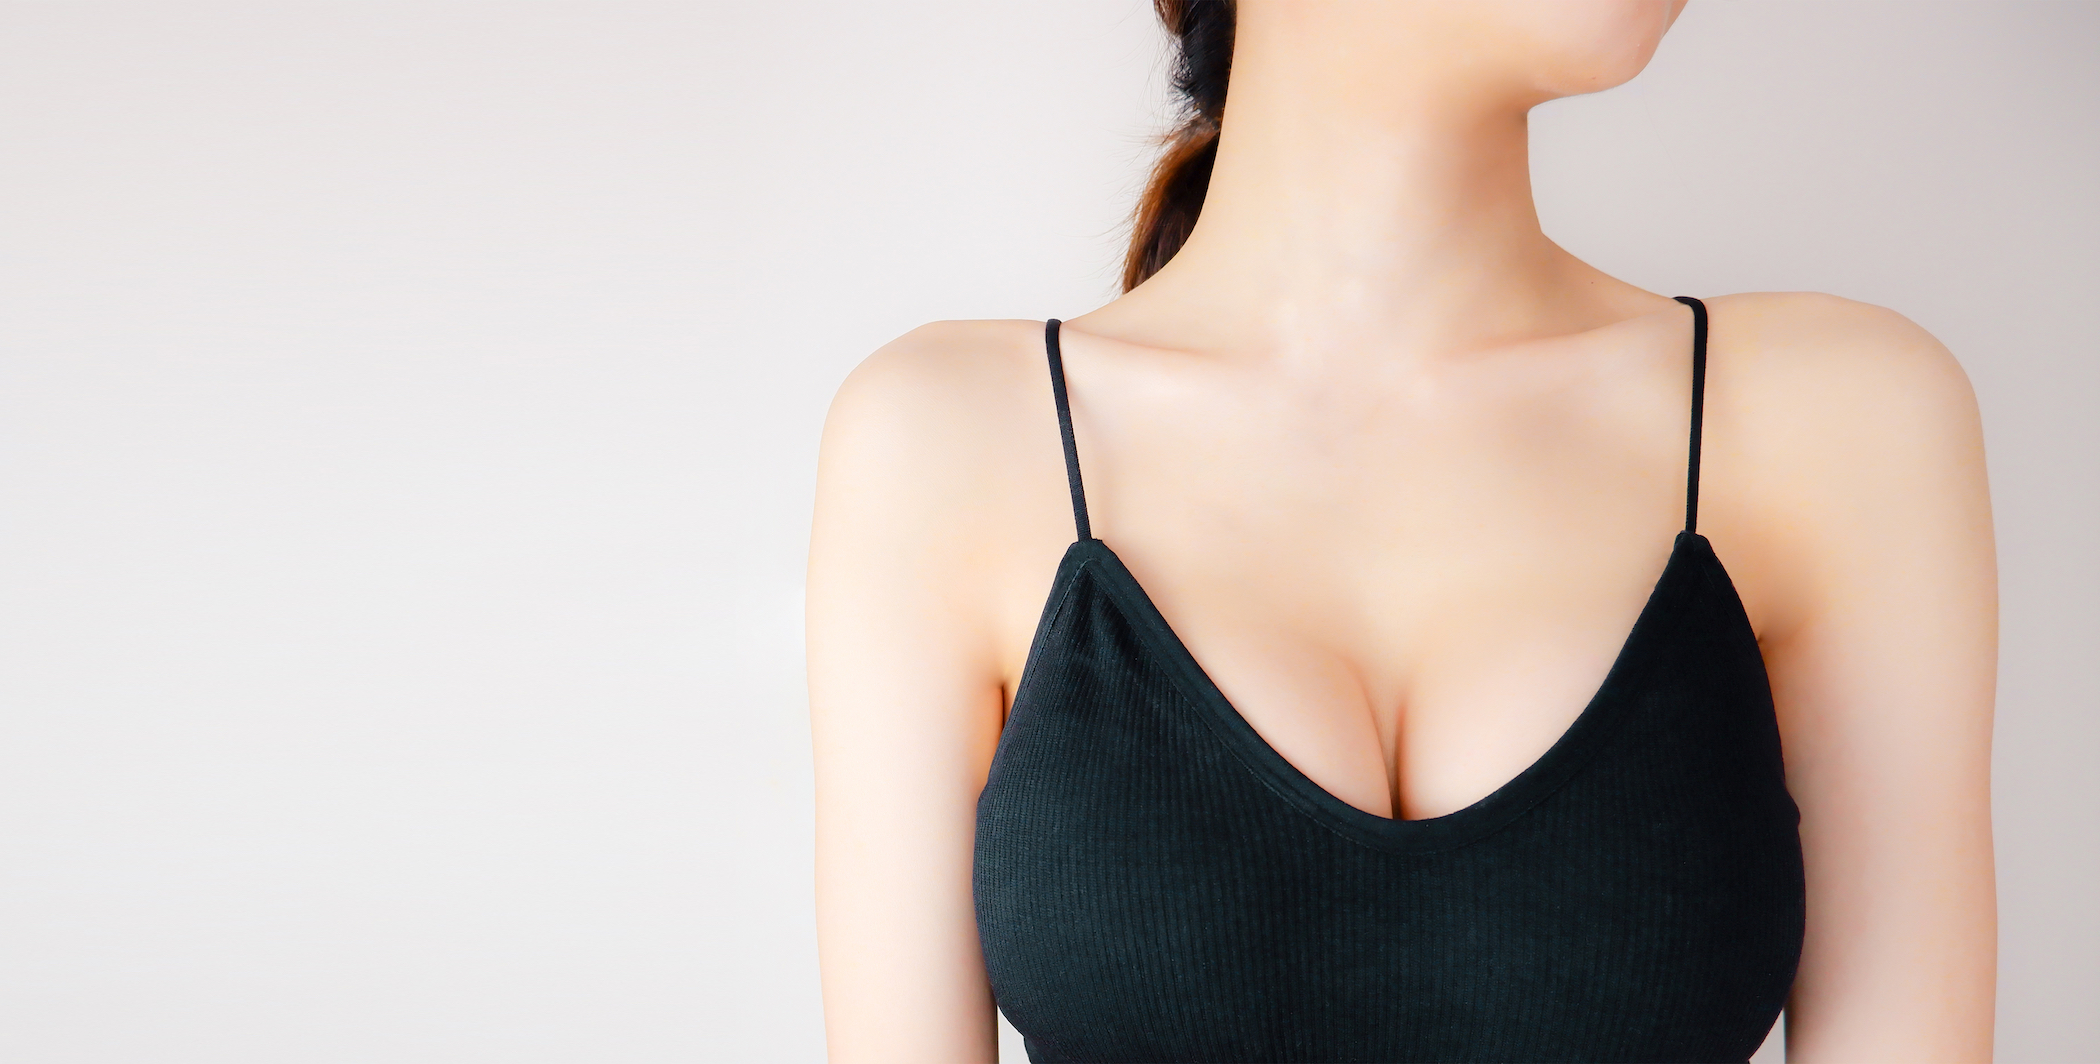 Breast Reduction Sizes: How Small Can You Go?